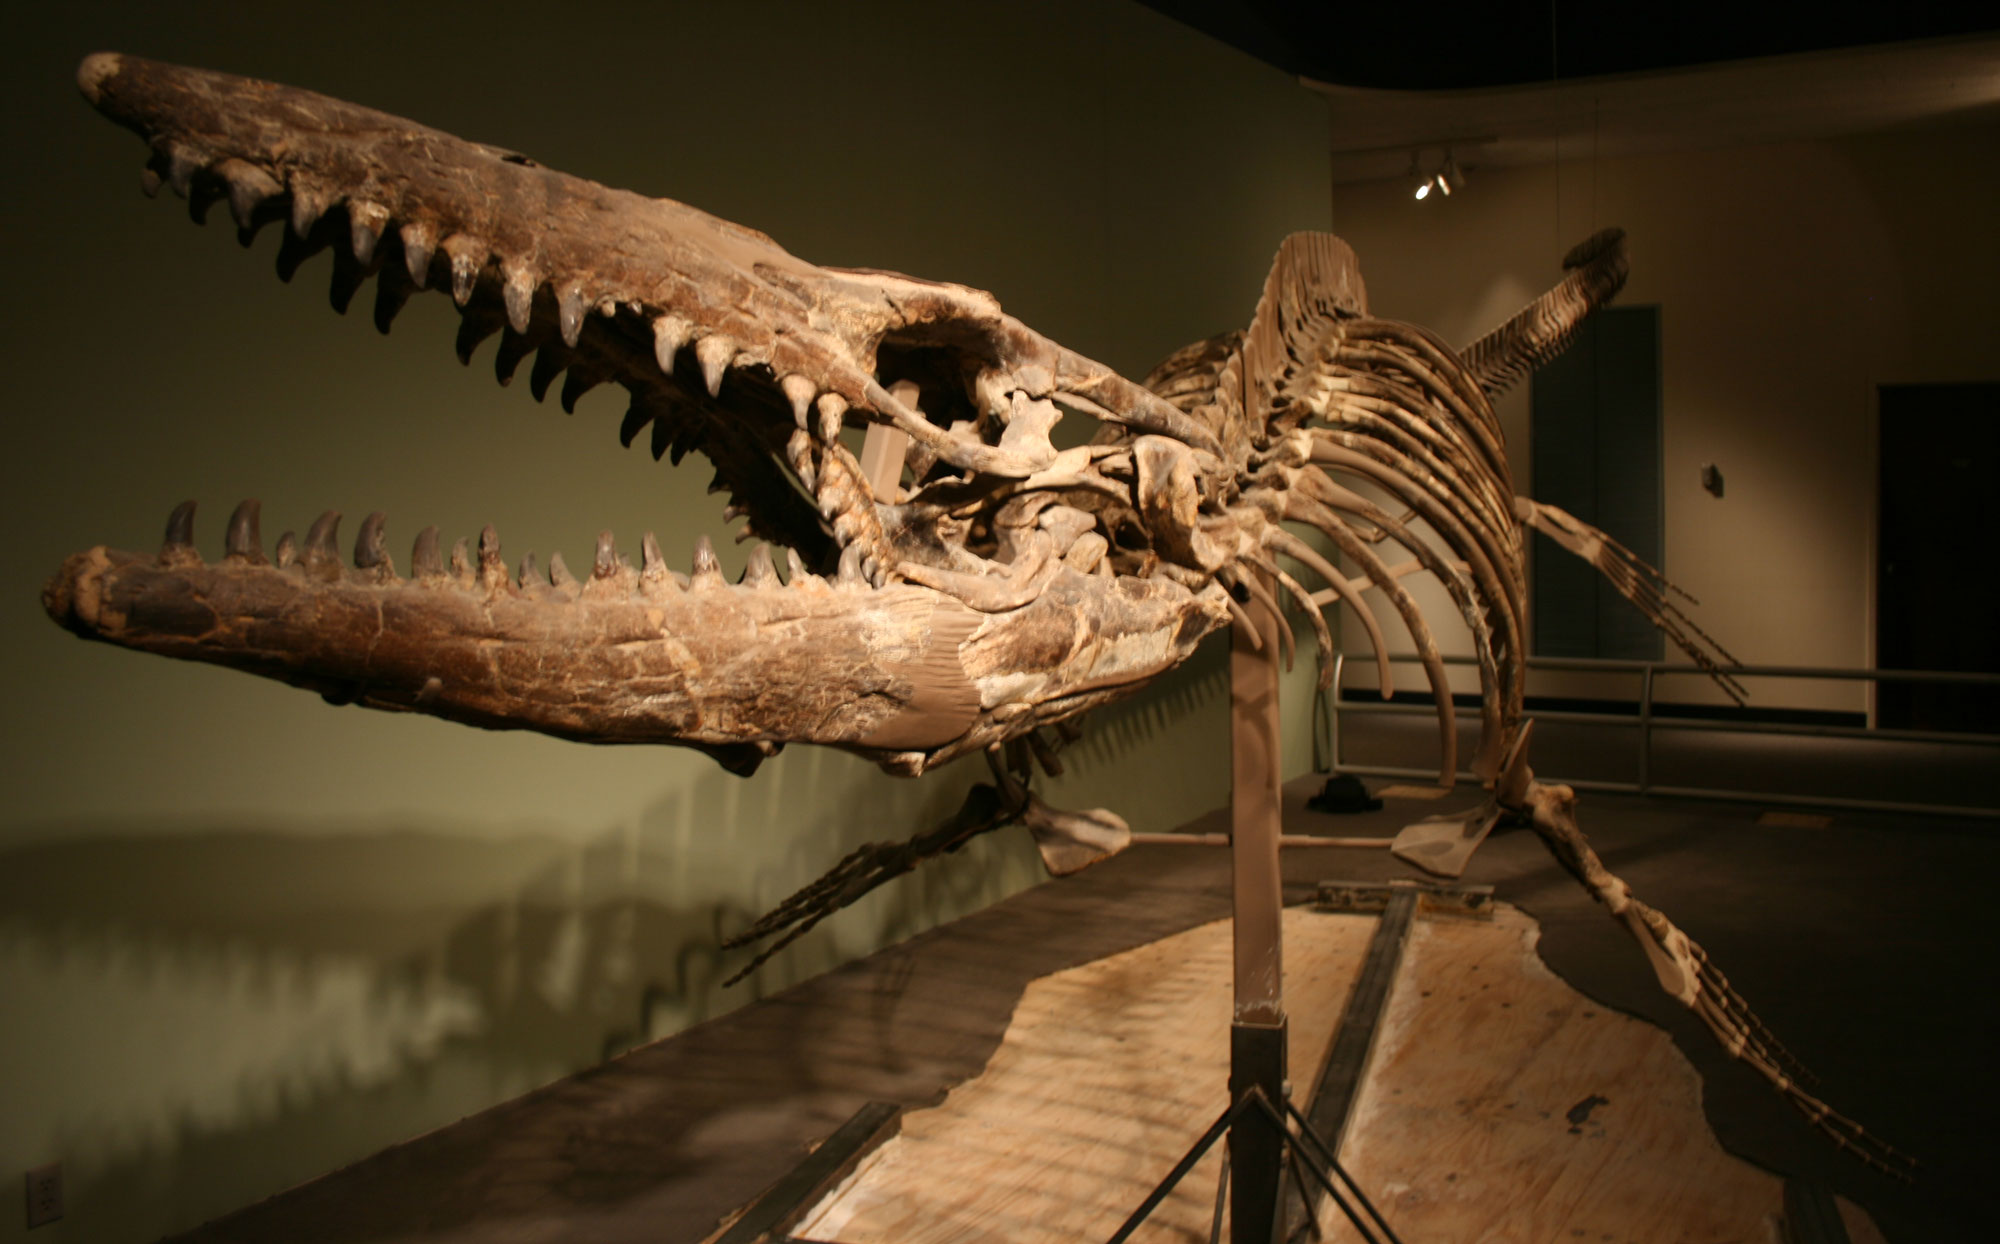 Photograph of a mounted mosasaur skeleton on display in a museum. The head is narrow and elongated and has many pointed teeth. The skeleton is mounted with the mouth open.